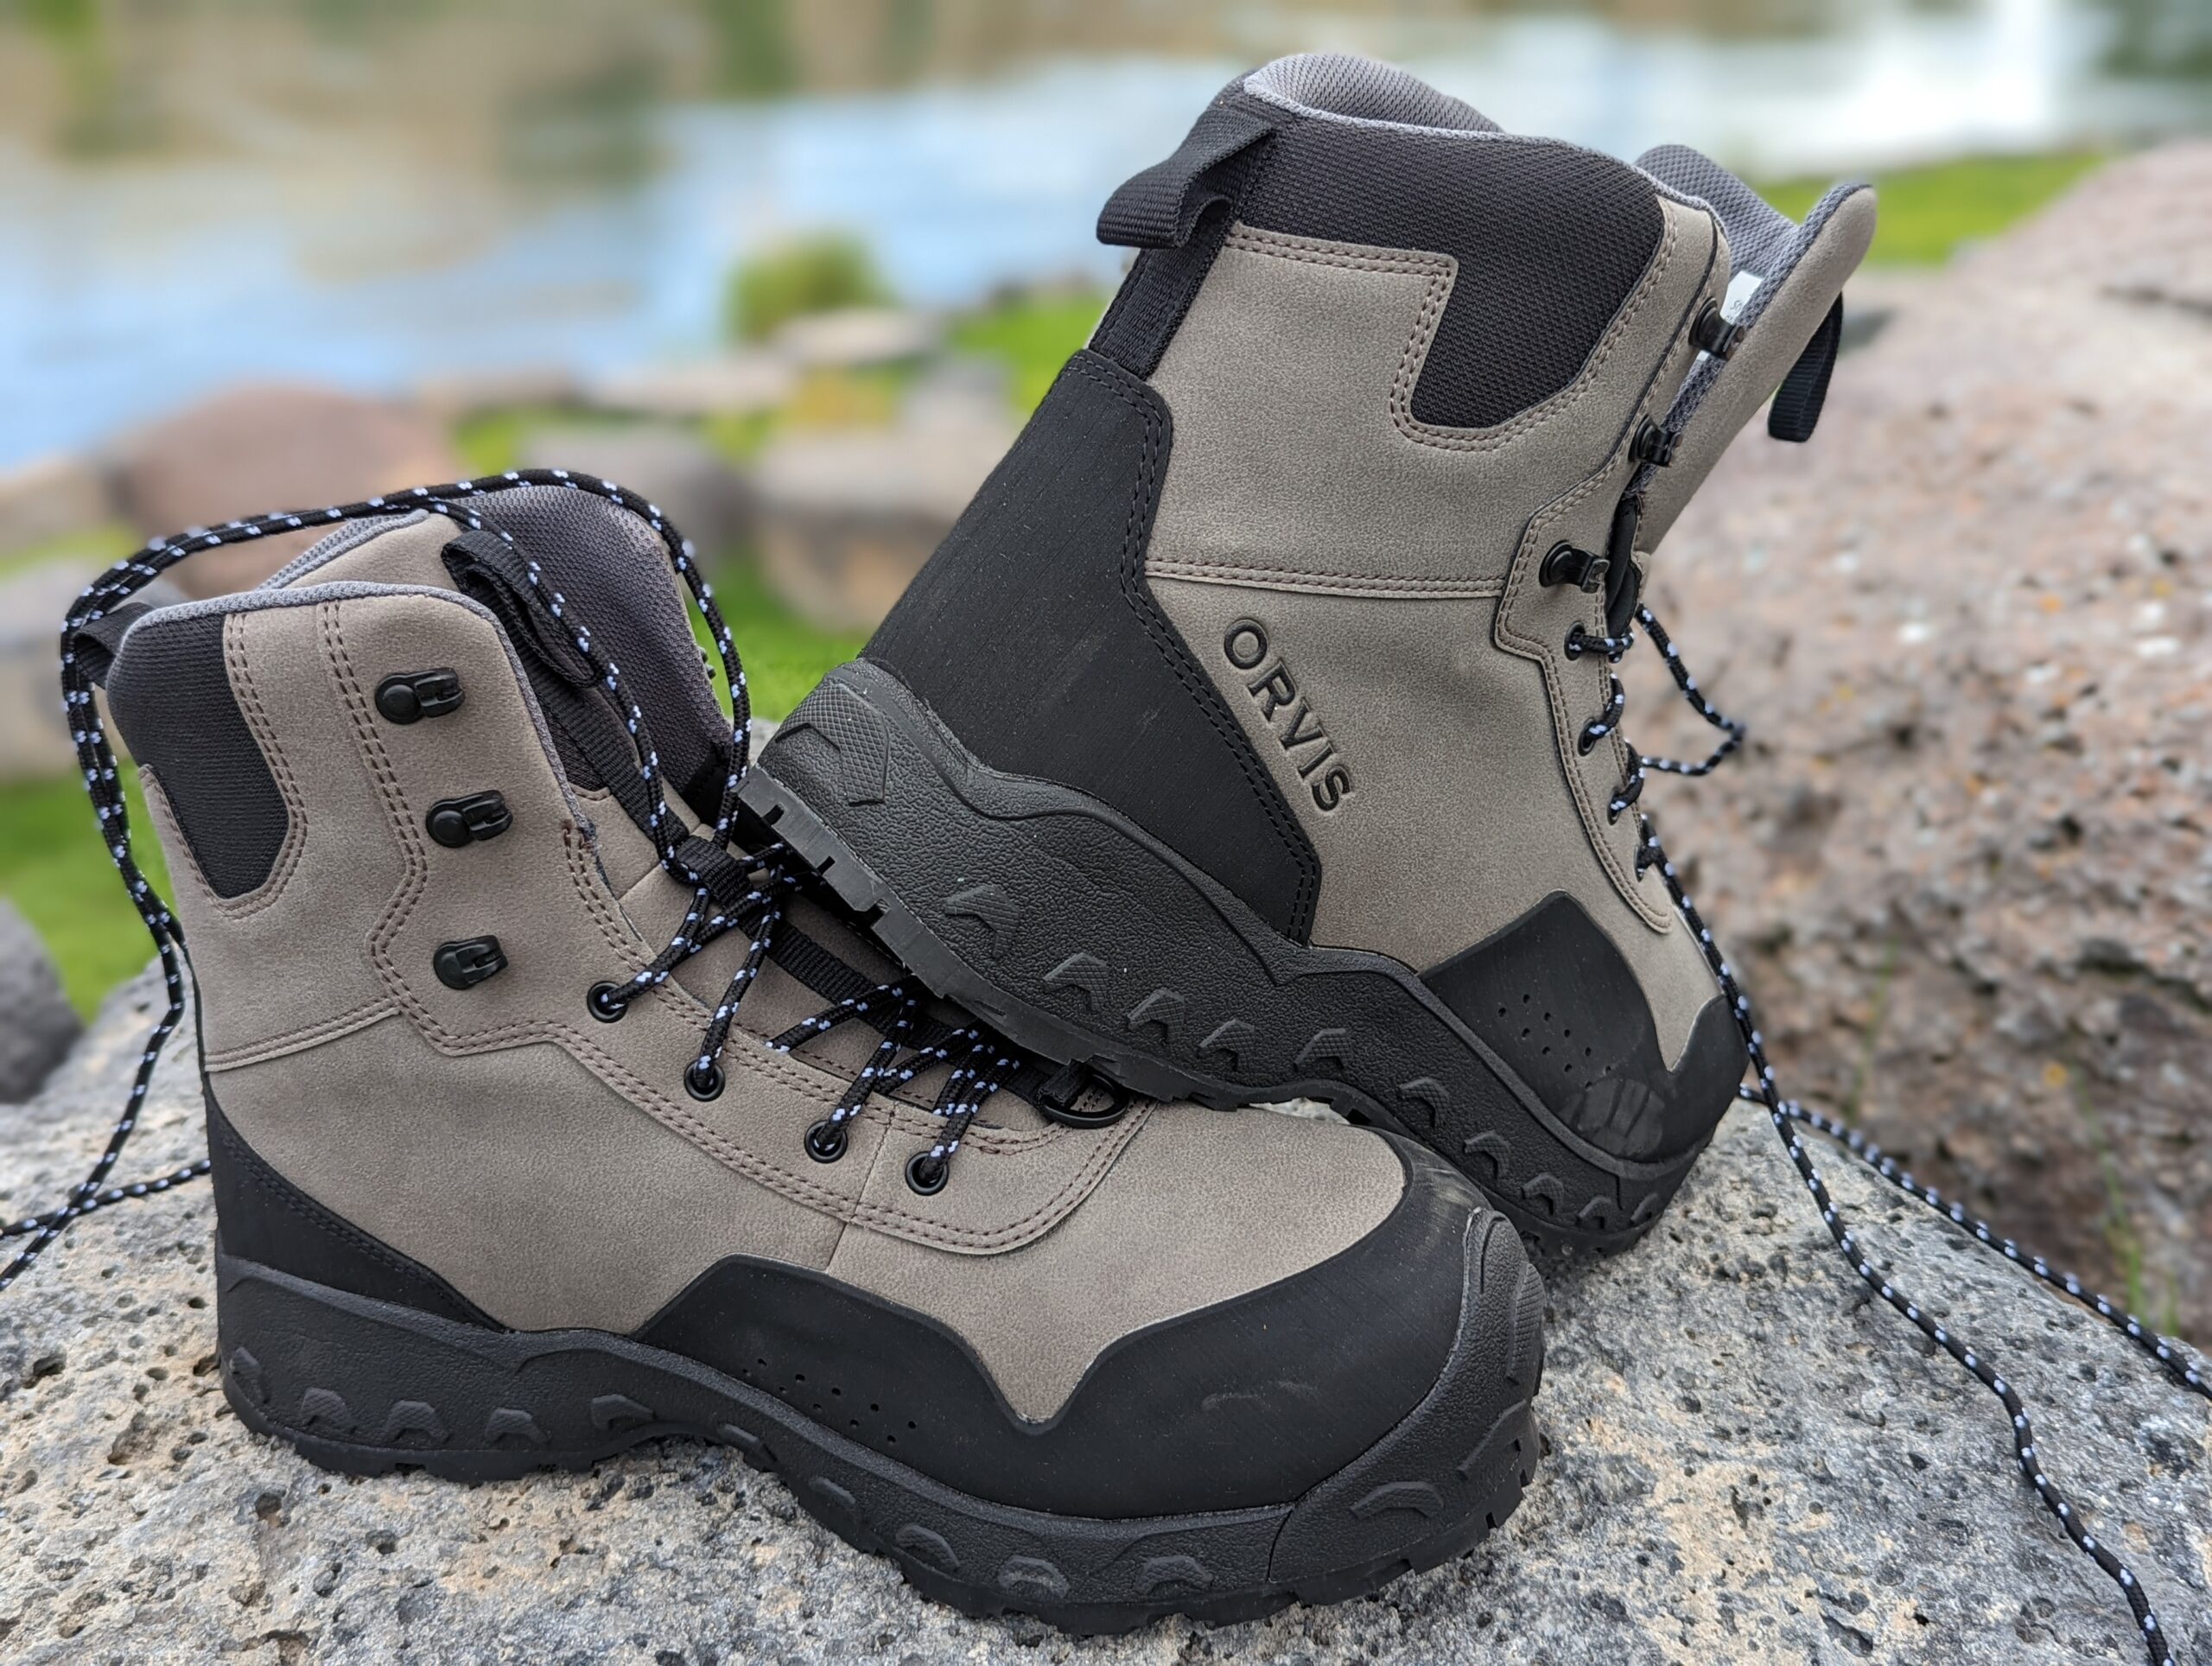 Quick-Dry Wading Boots Camo Pattern with Felt Sole or Rubber Sole